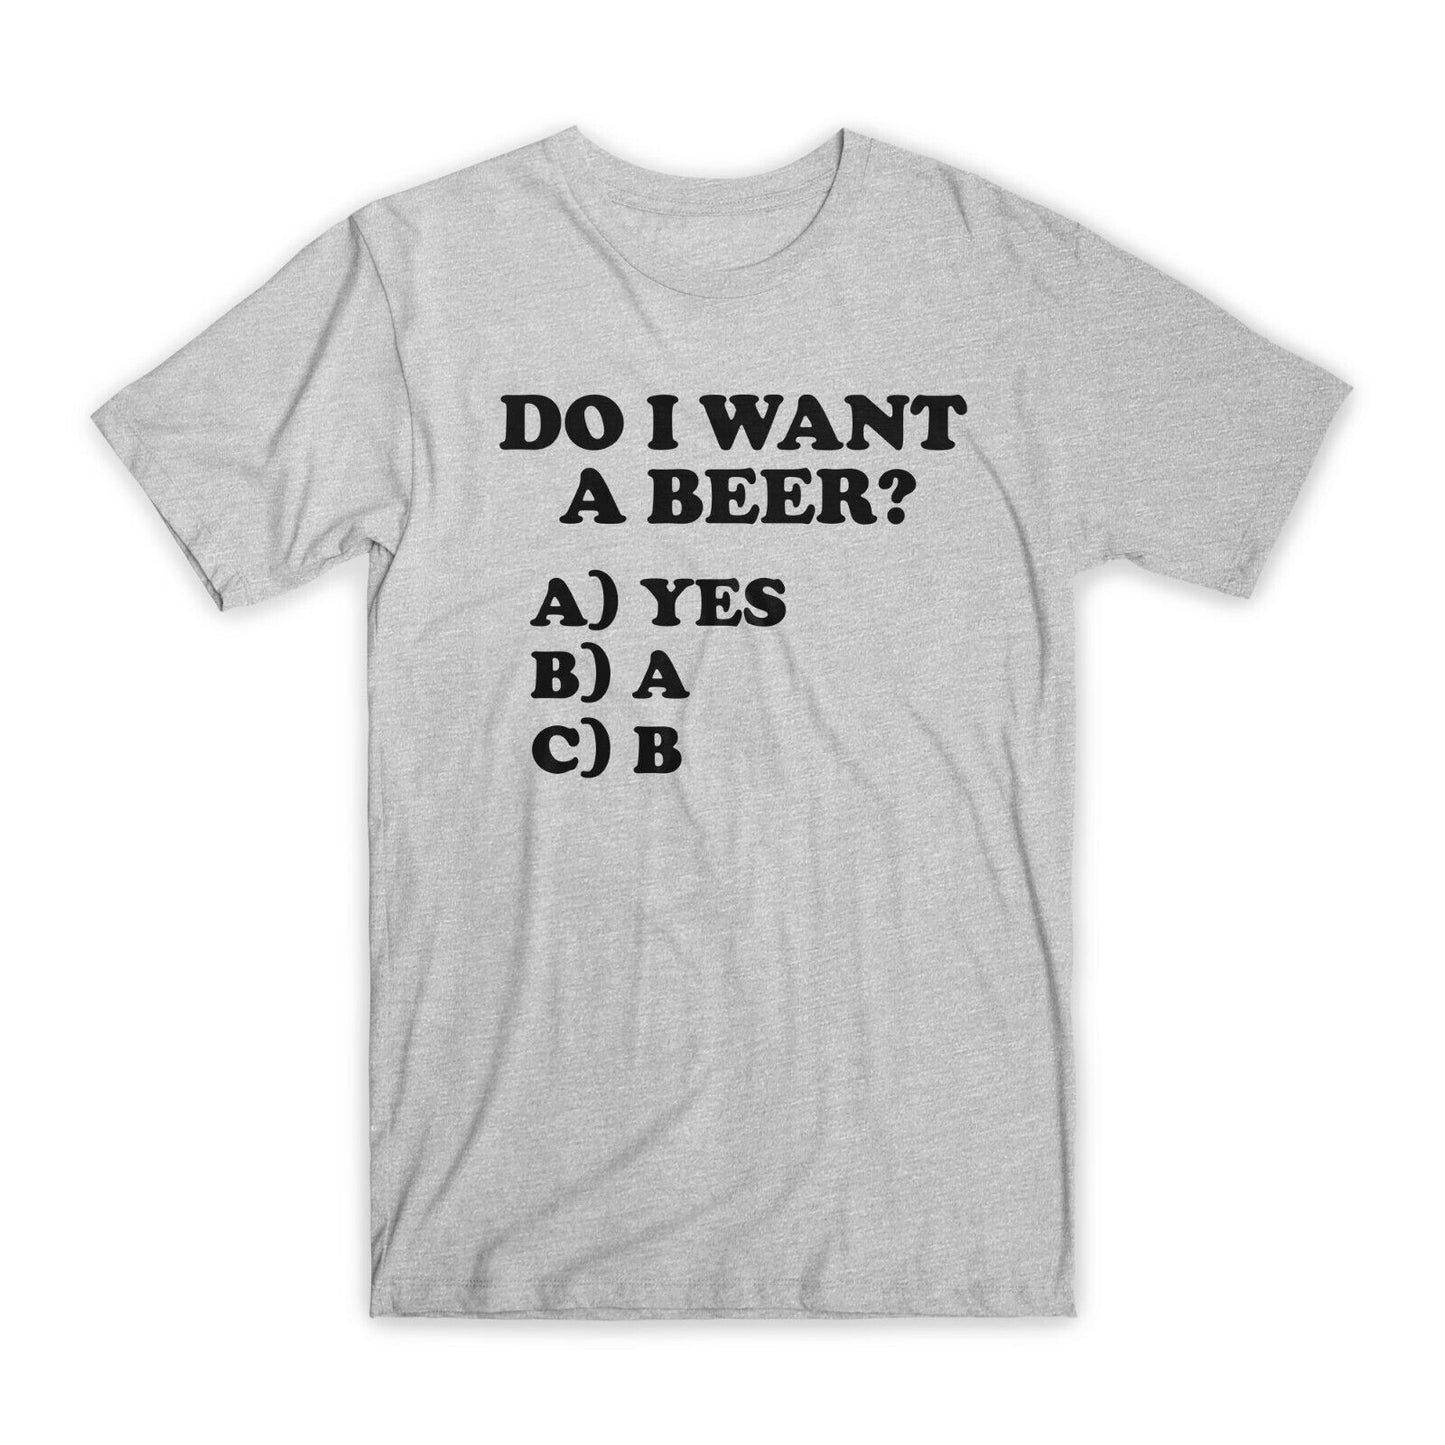 Do I Want Beer T-Shirt Premium Soft Cotton Crew Neck Funny Tees Novelty Gift NEW